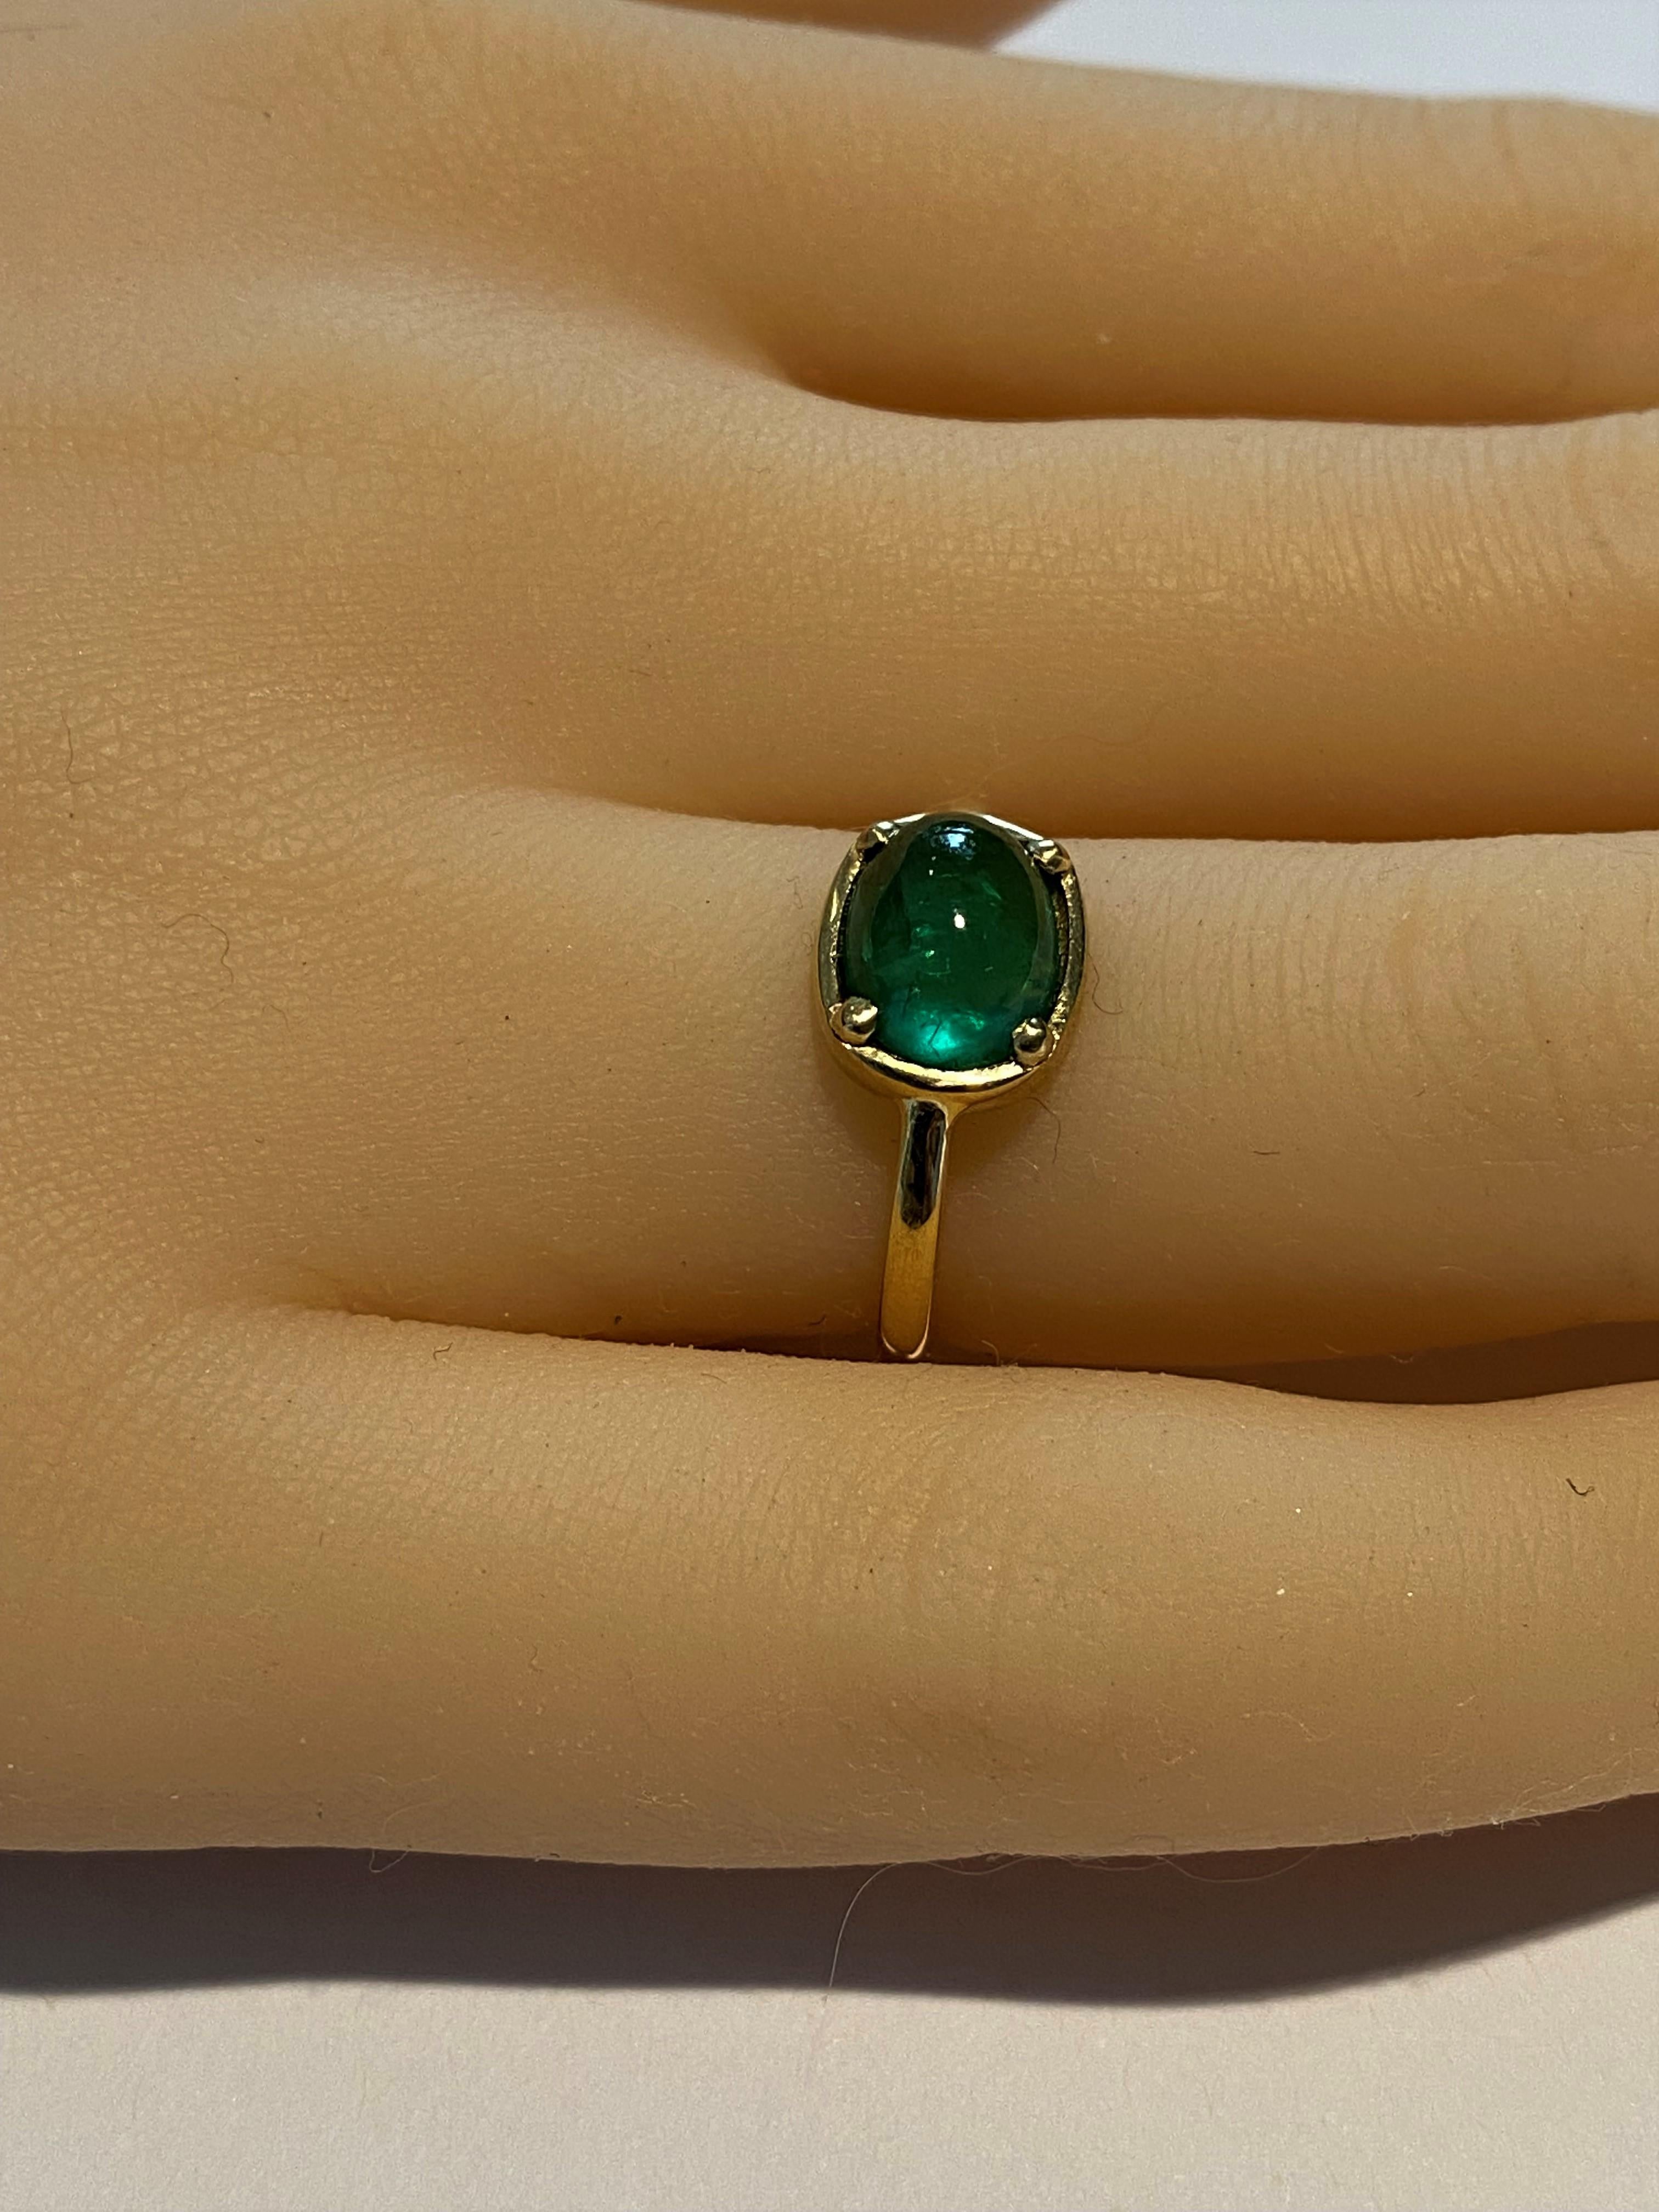 Cabochon Emerald Gold Cocktail Ring Weighing 2.25 Carat 2